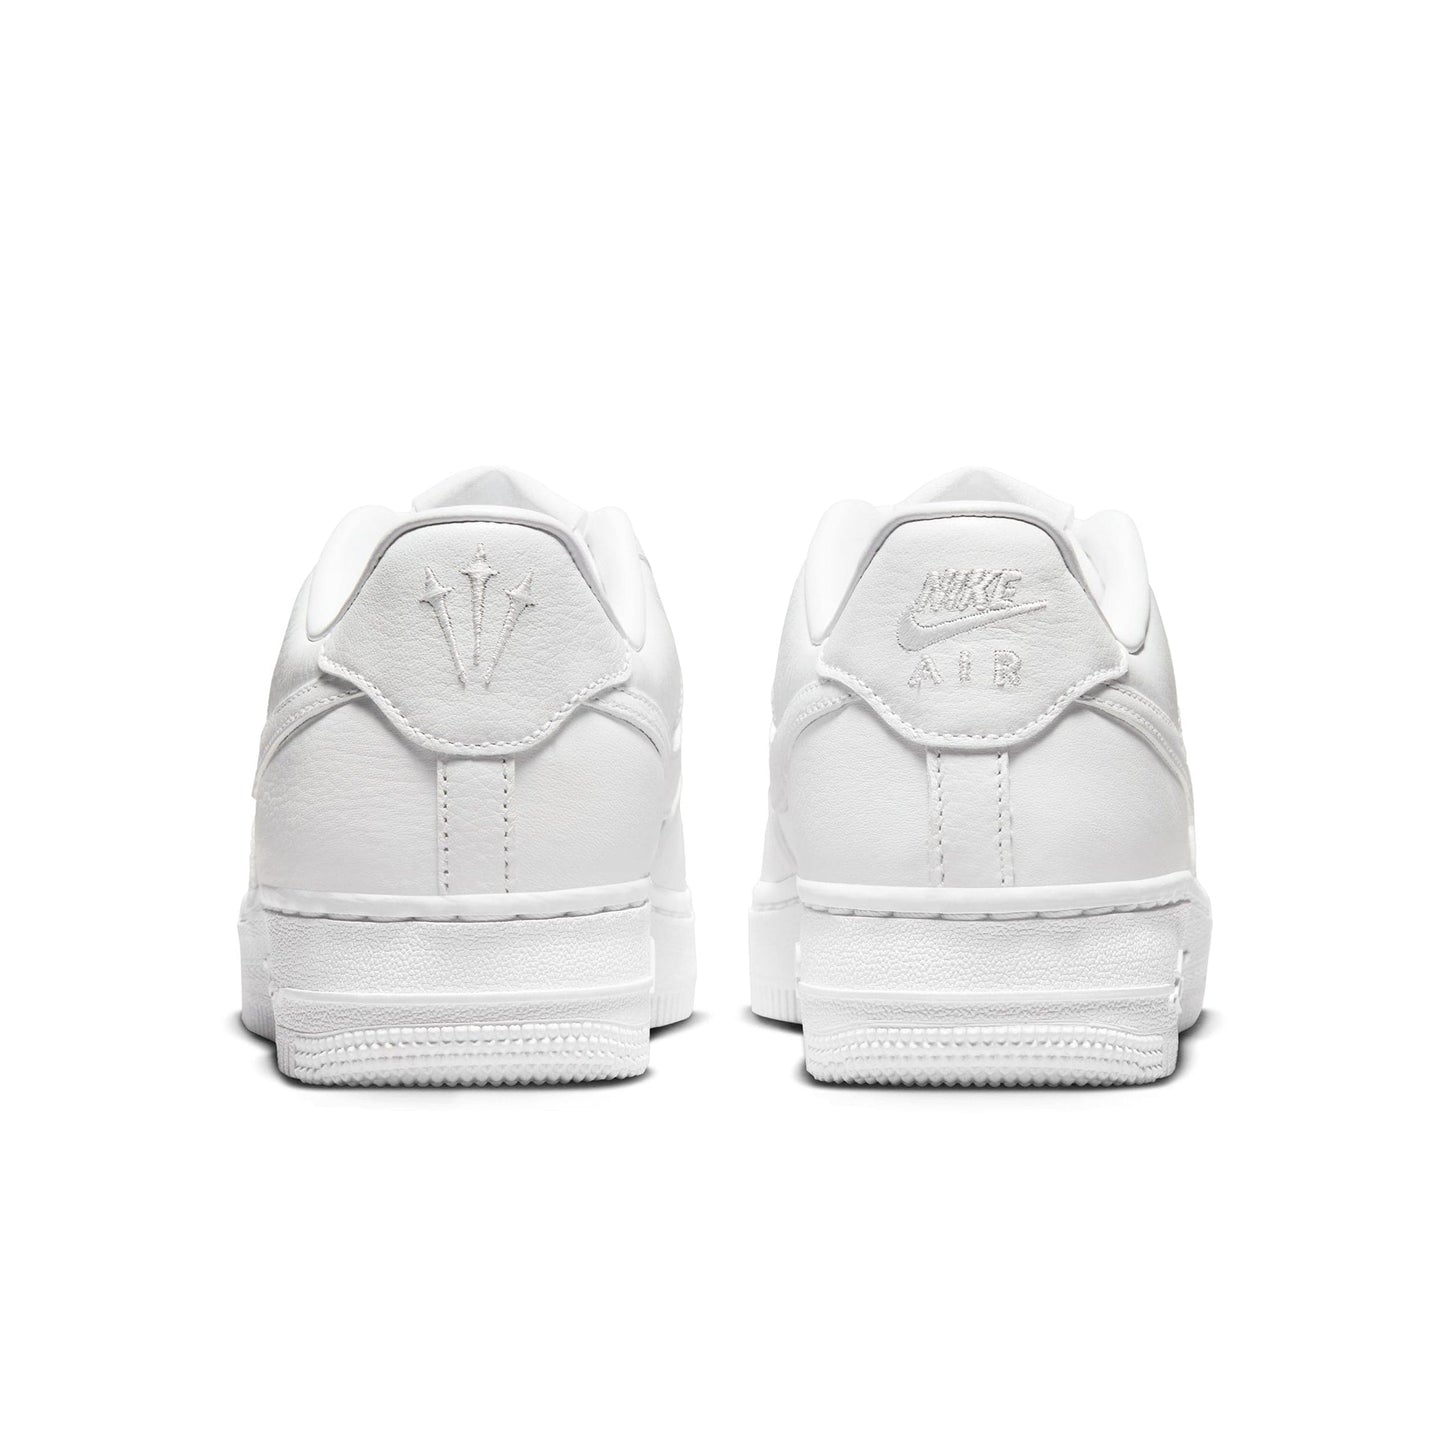 Nike Youth NOCTA AIR FORCE 1